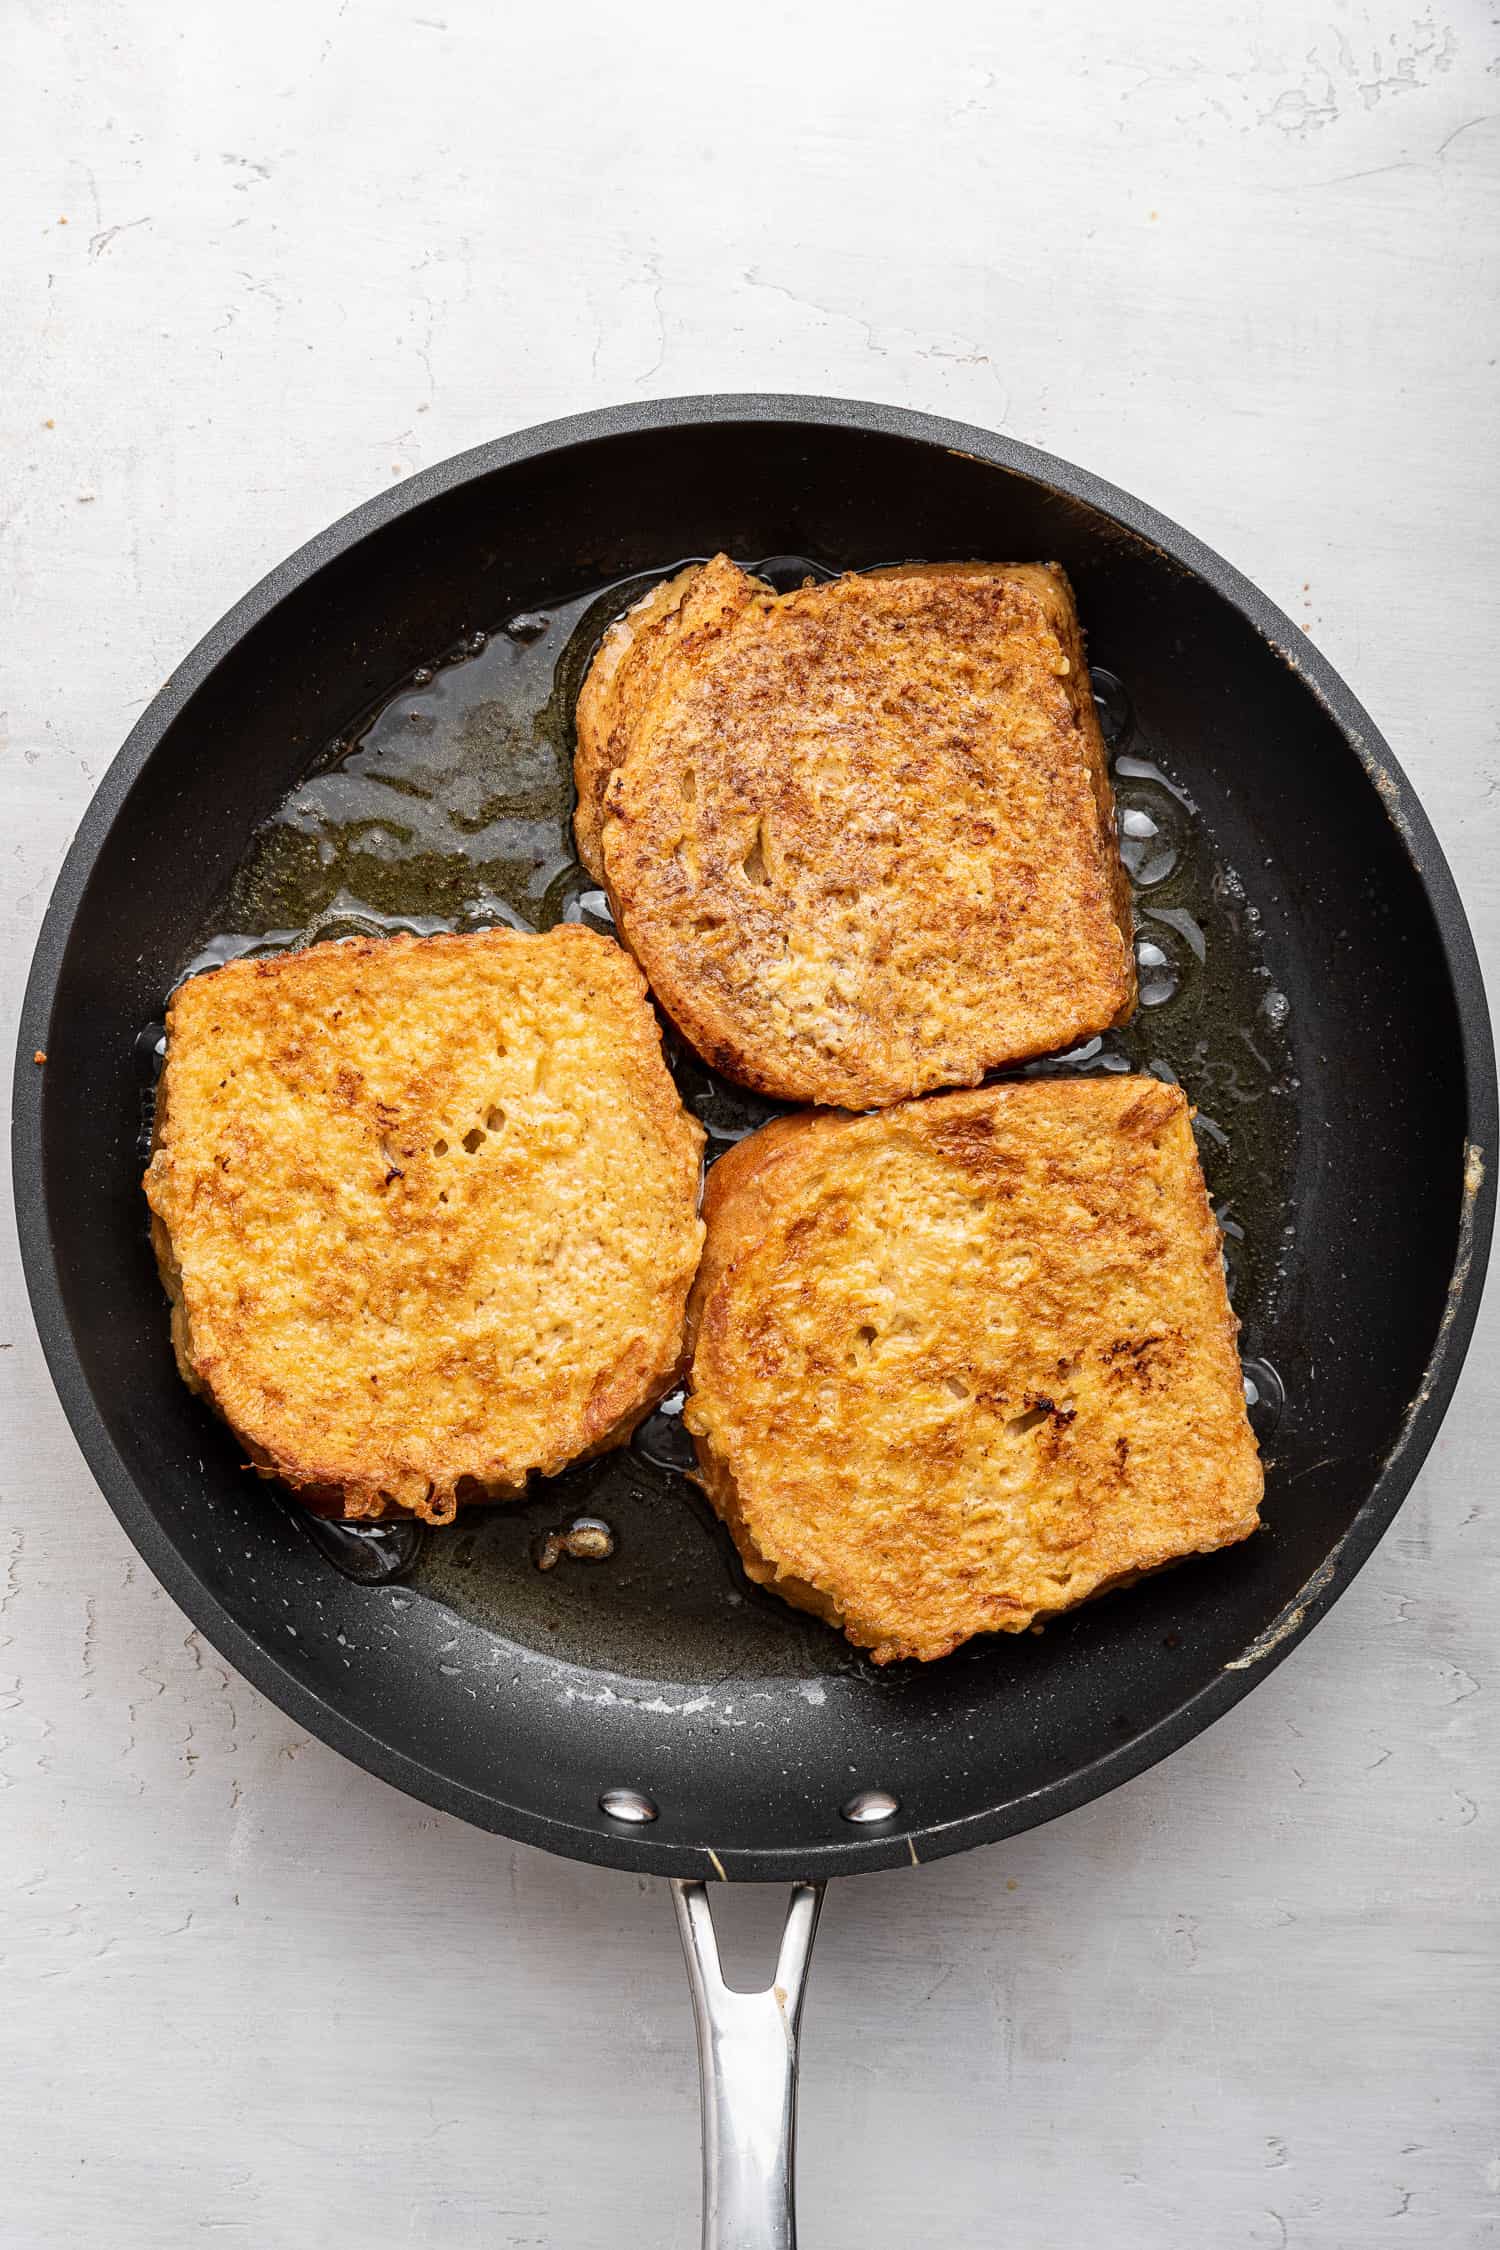 Browning the French toast in a pan. 